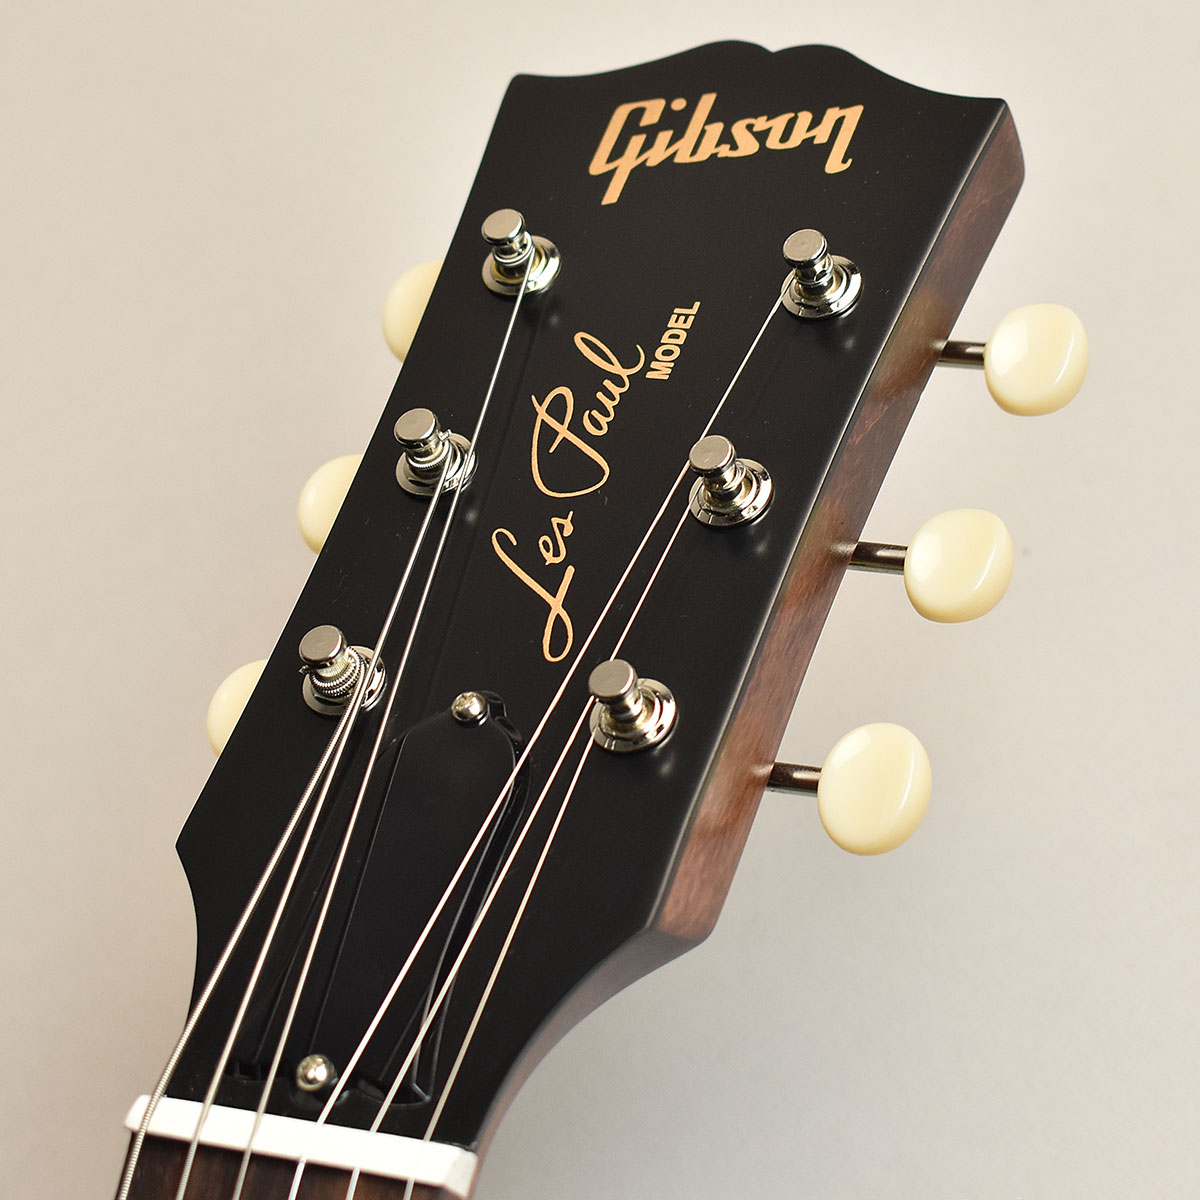 Gibson イヤホン Les Paul Special Tribute Double モズライト Cut Worn Les Brown S N ギブソン レスポールスペシャル 未展示品 島村楽器